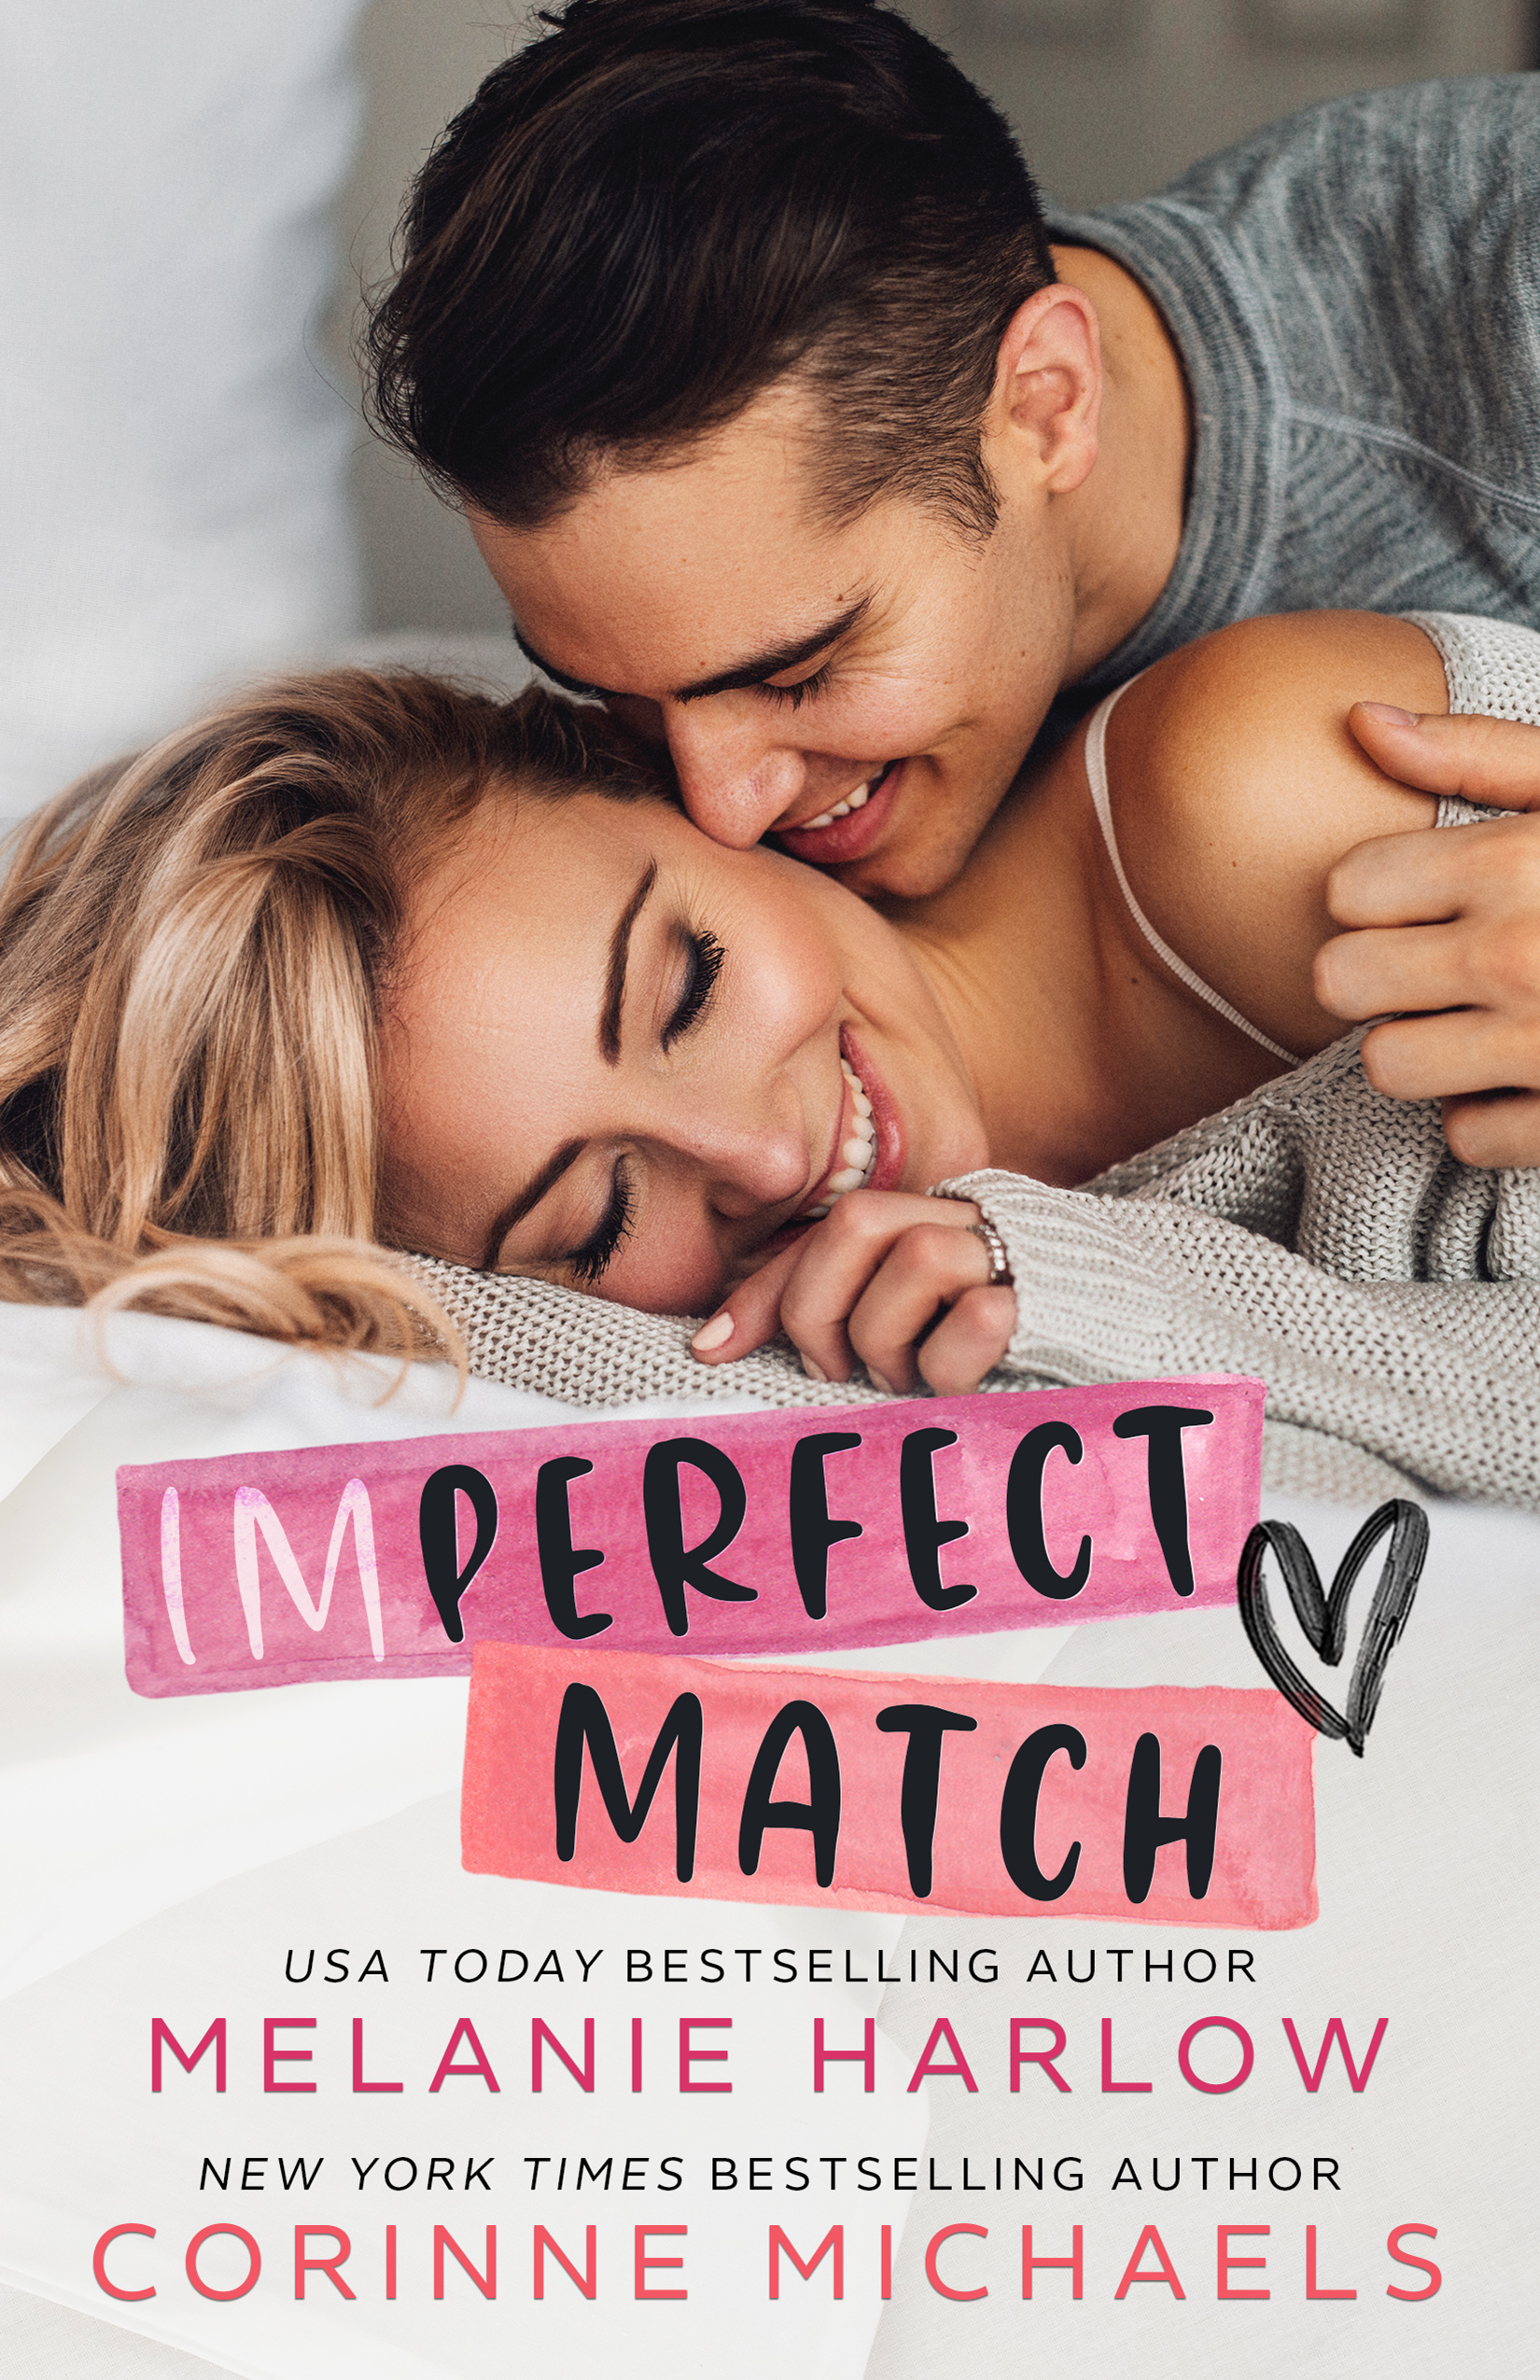 Imperfect Match by Melanie Harlow and Corinne Michaels [Release Blitz]